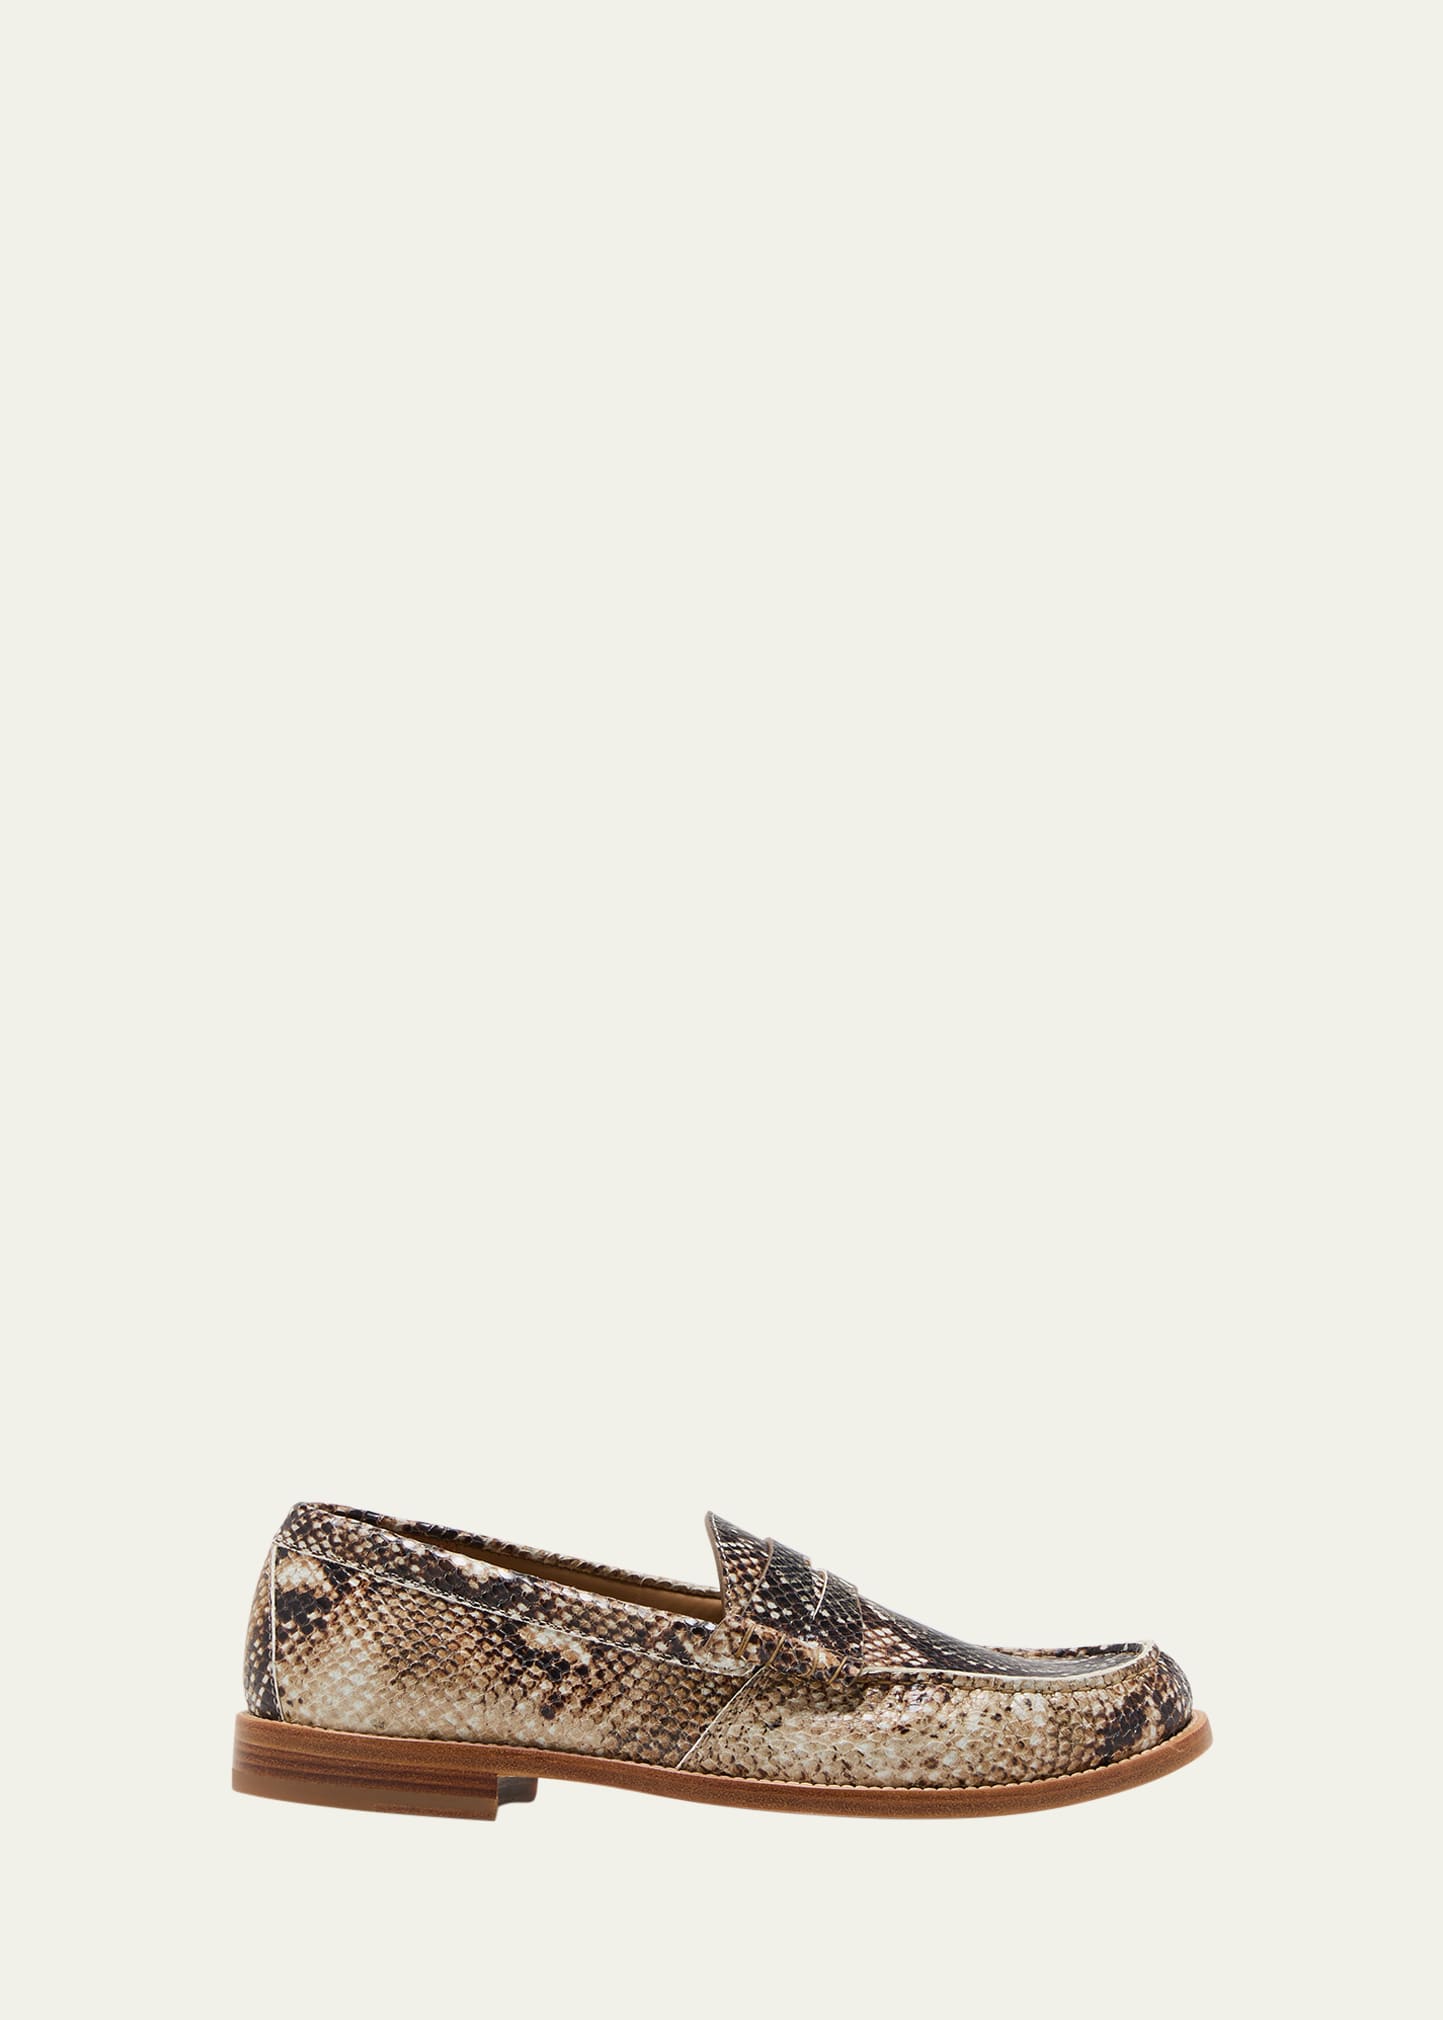 RHUDE MEN'S SNAKE-PRINT LEATHER PENNY LOAFERS